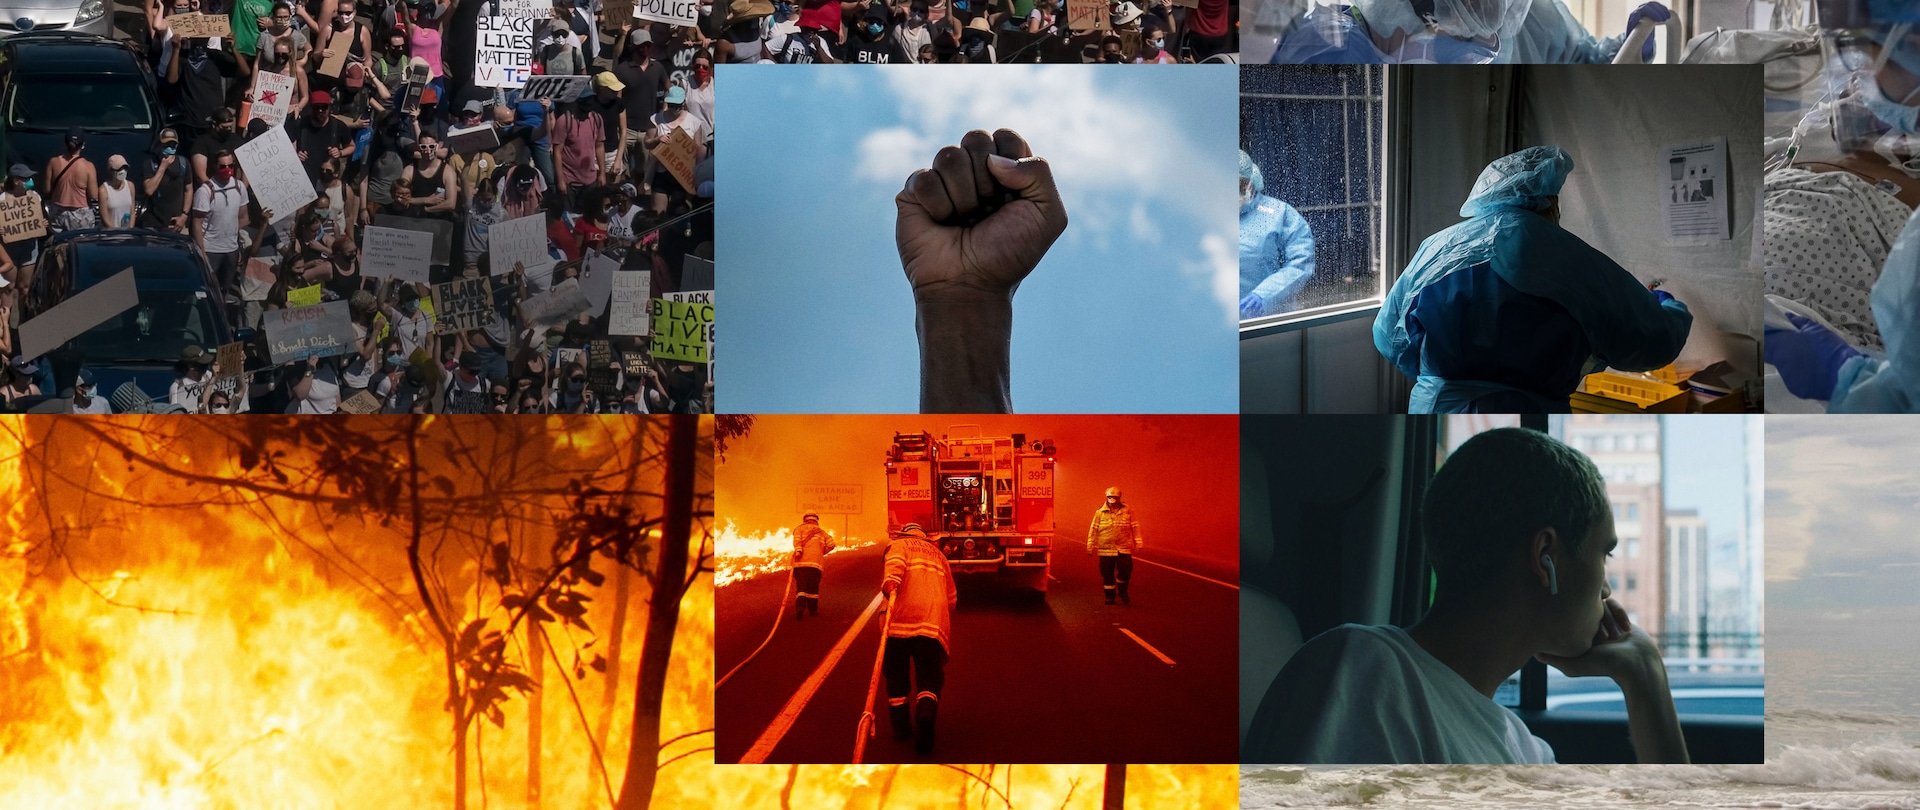 Collage of several images including wildfire, protests, firefighters and hospital workers for New York Times Presents